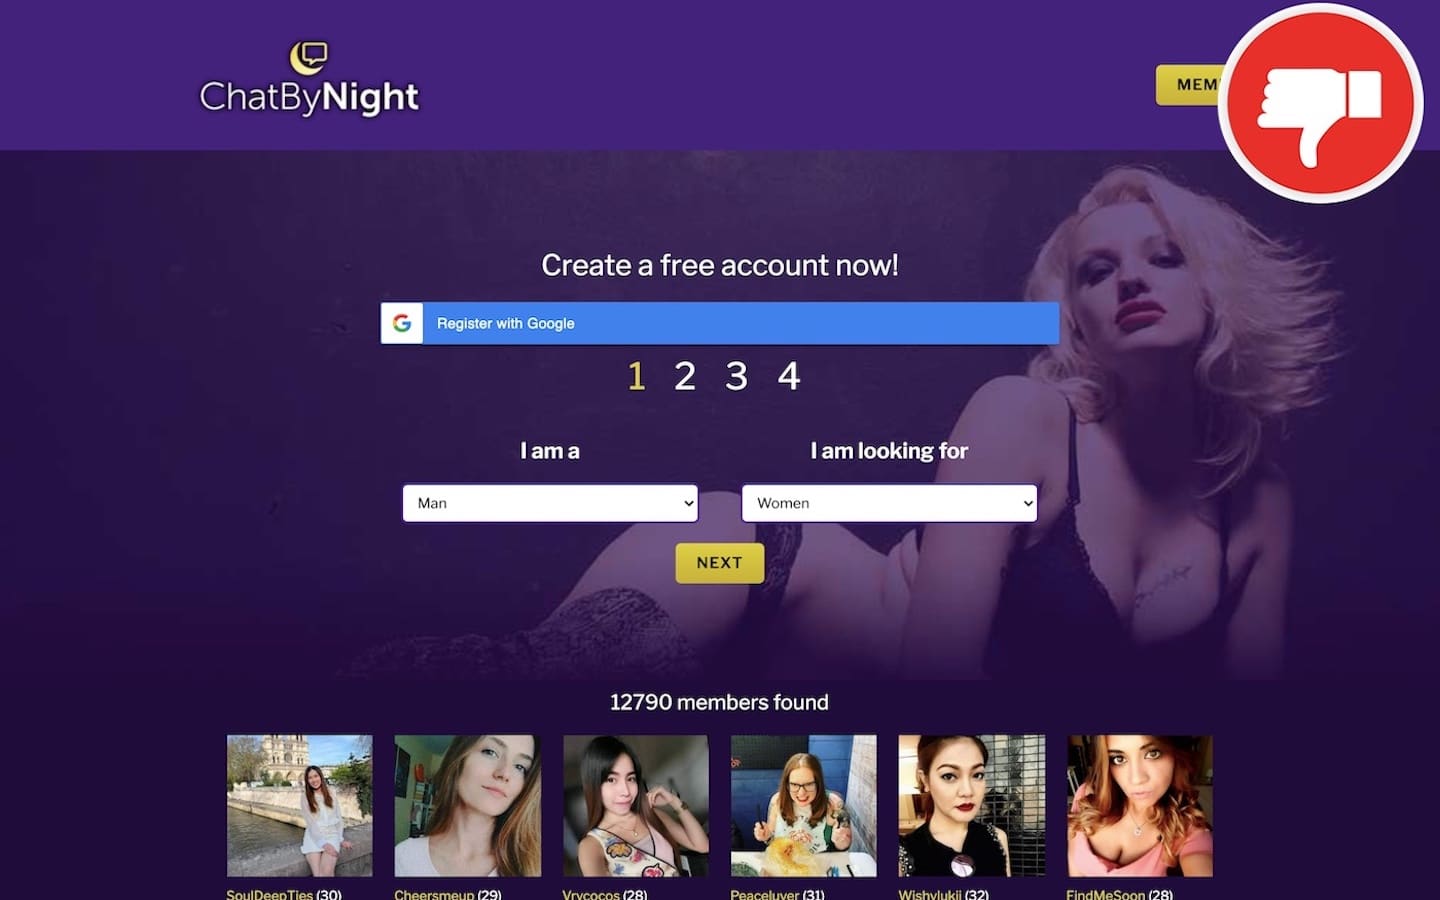 Review ChatByNight.com scam experience